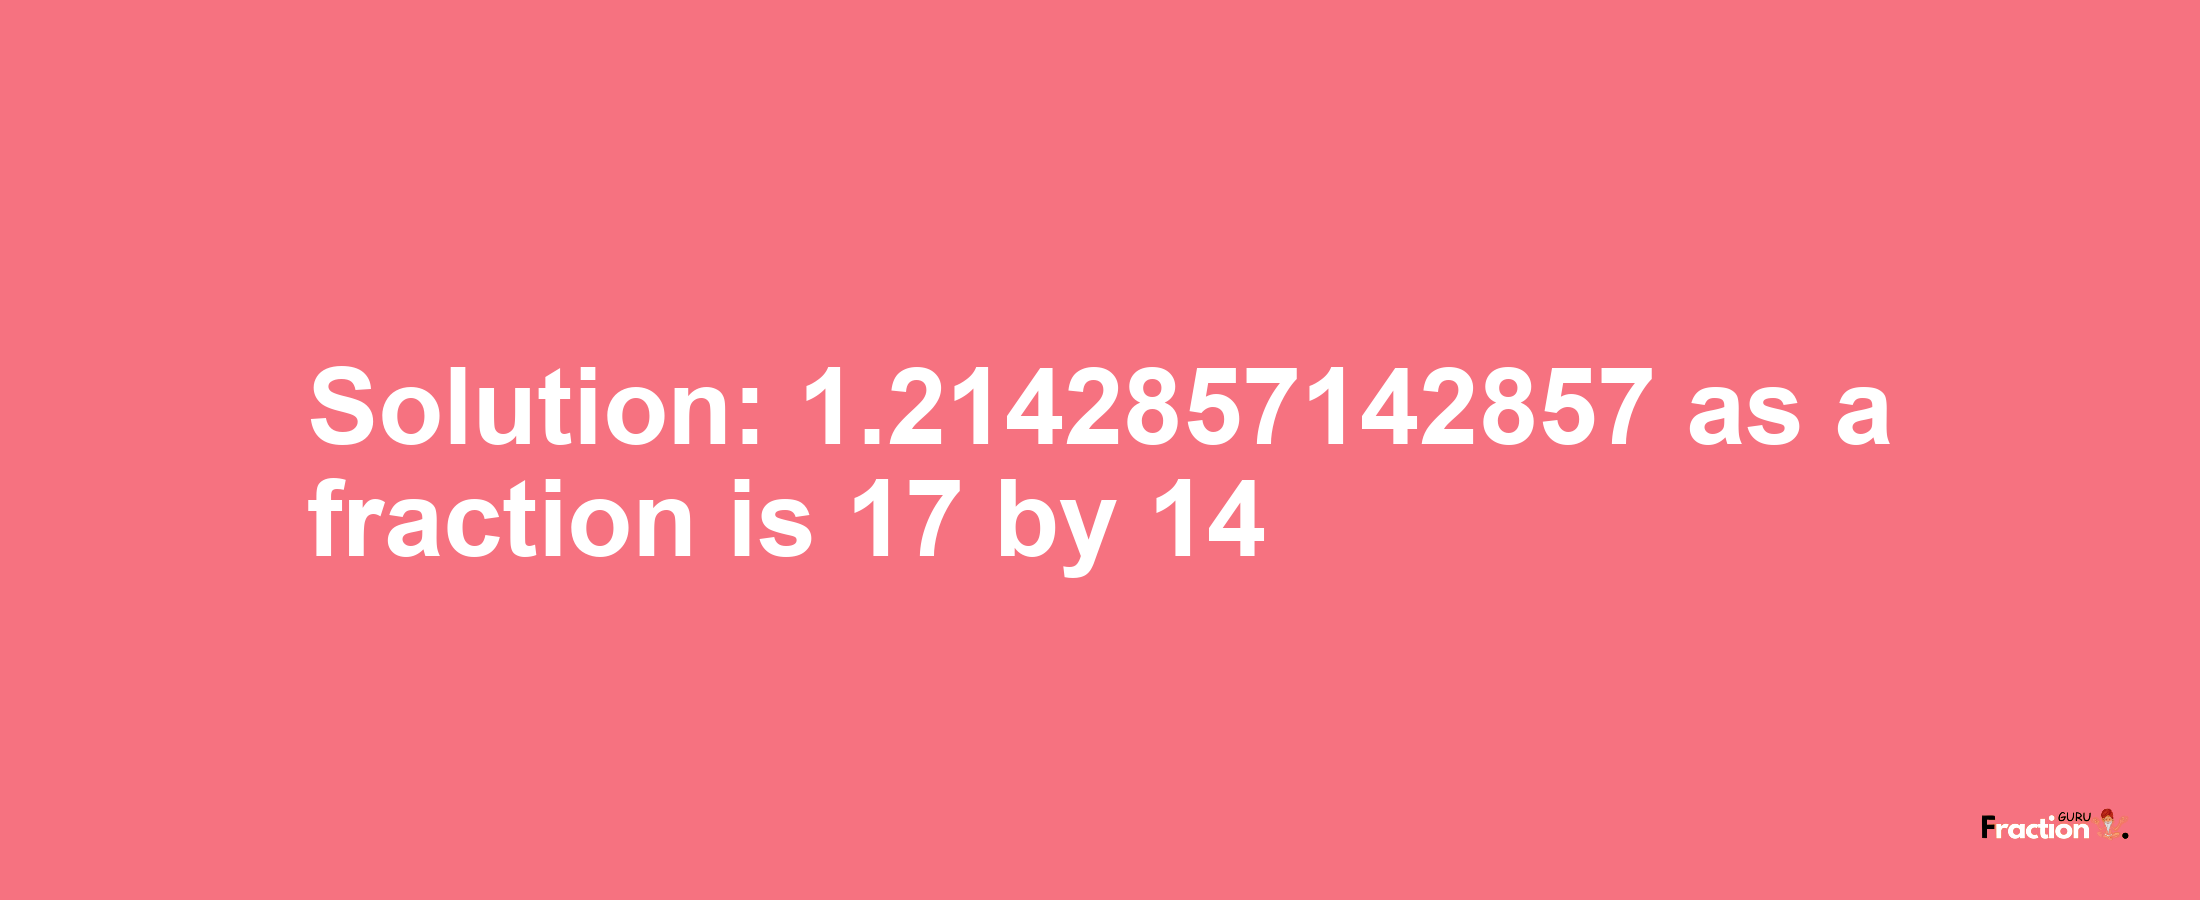 Solution:1.2142857142857 as a fraction is 17/14